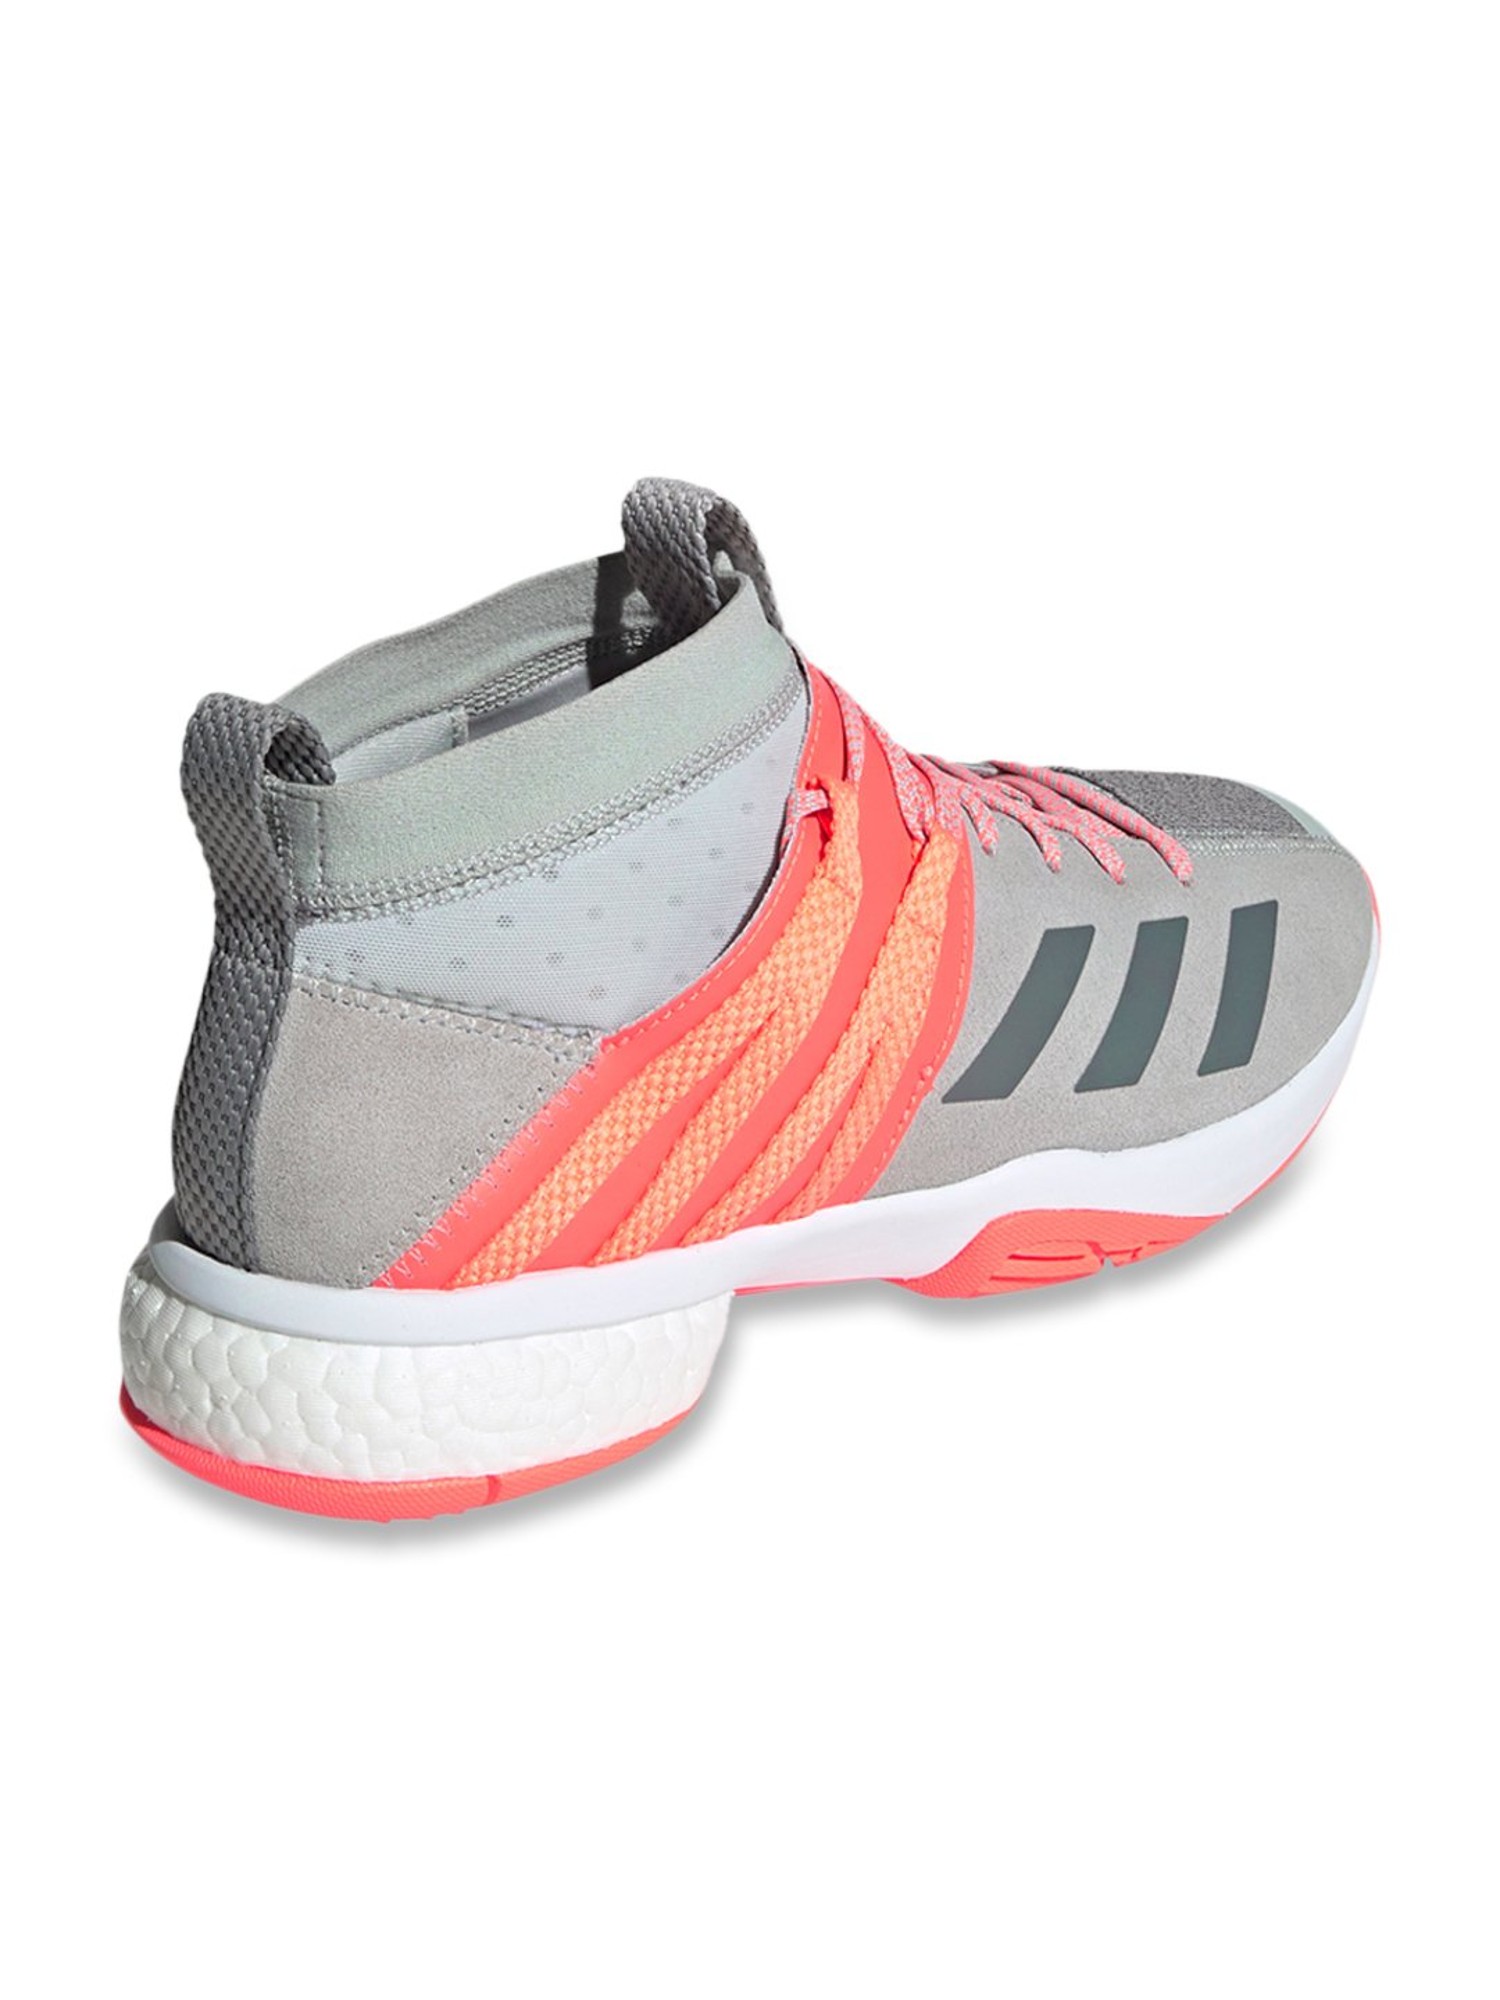 adidas wucht p8 shoes